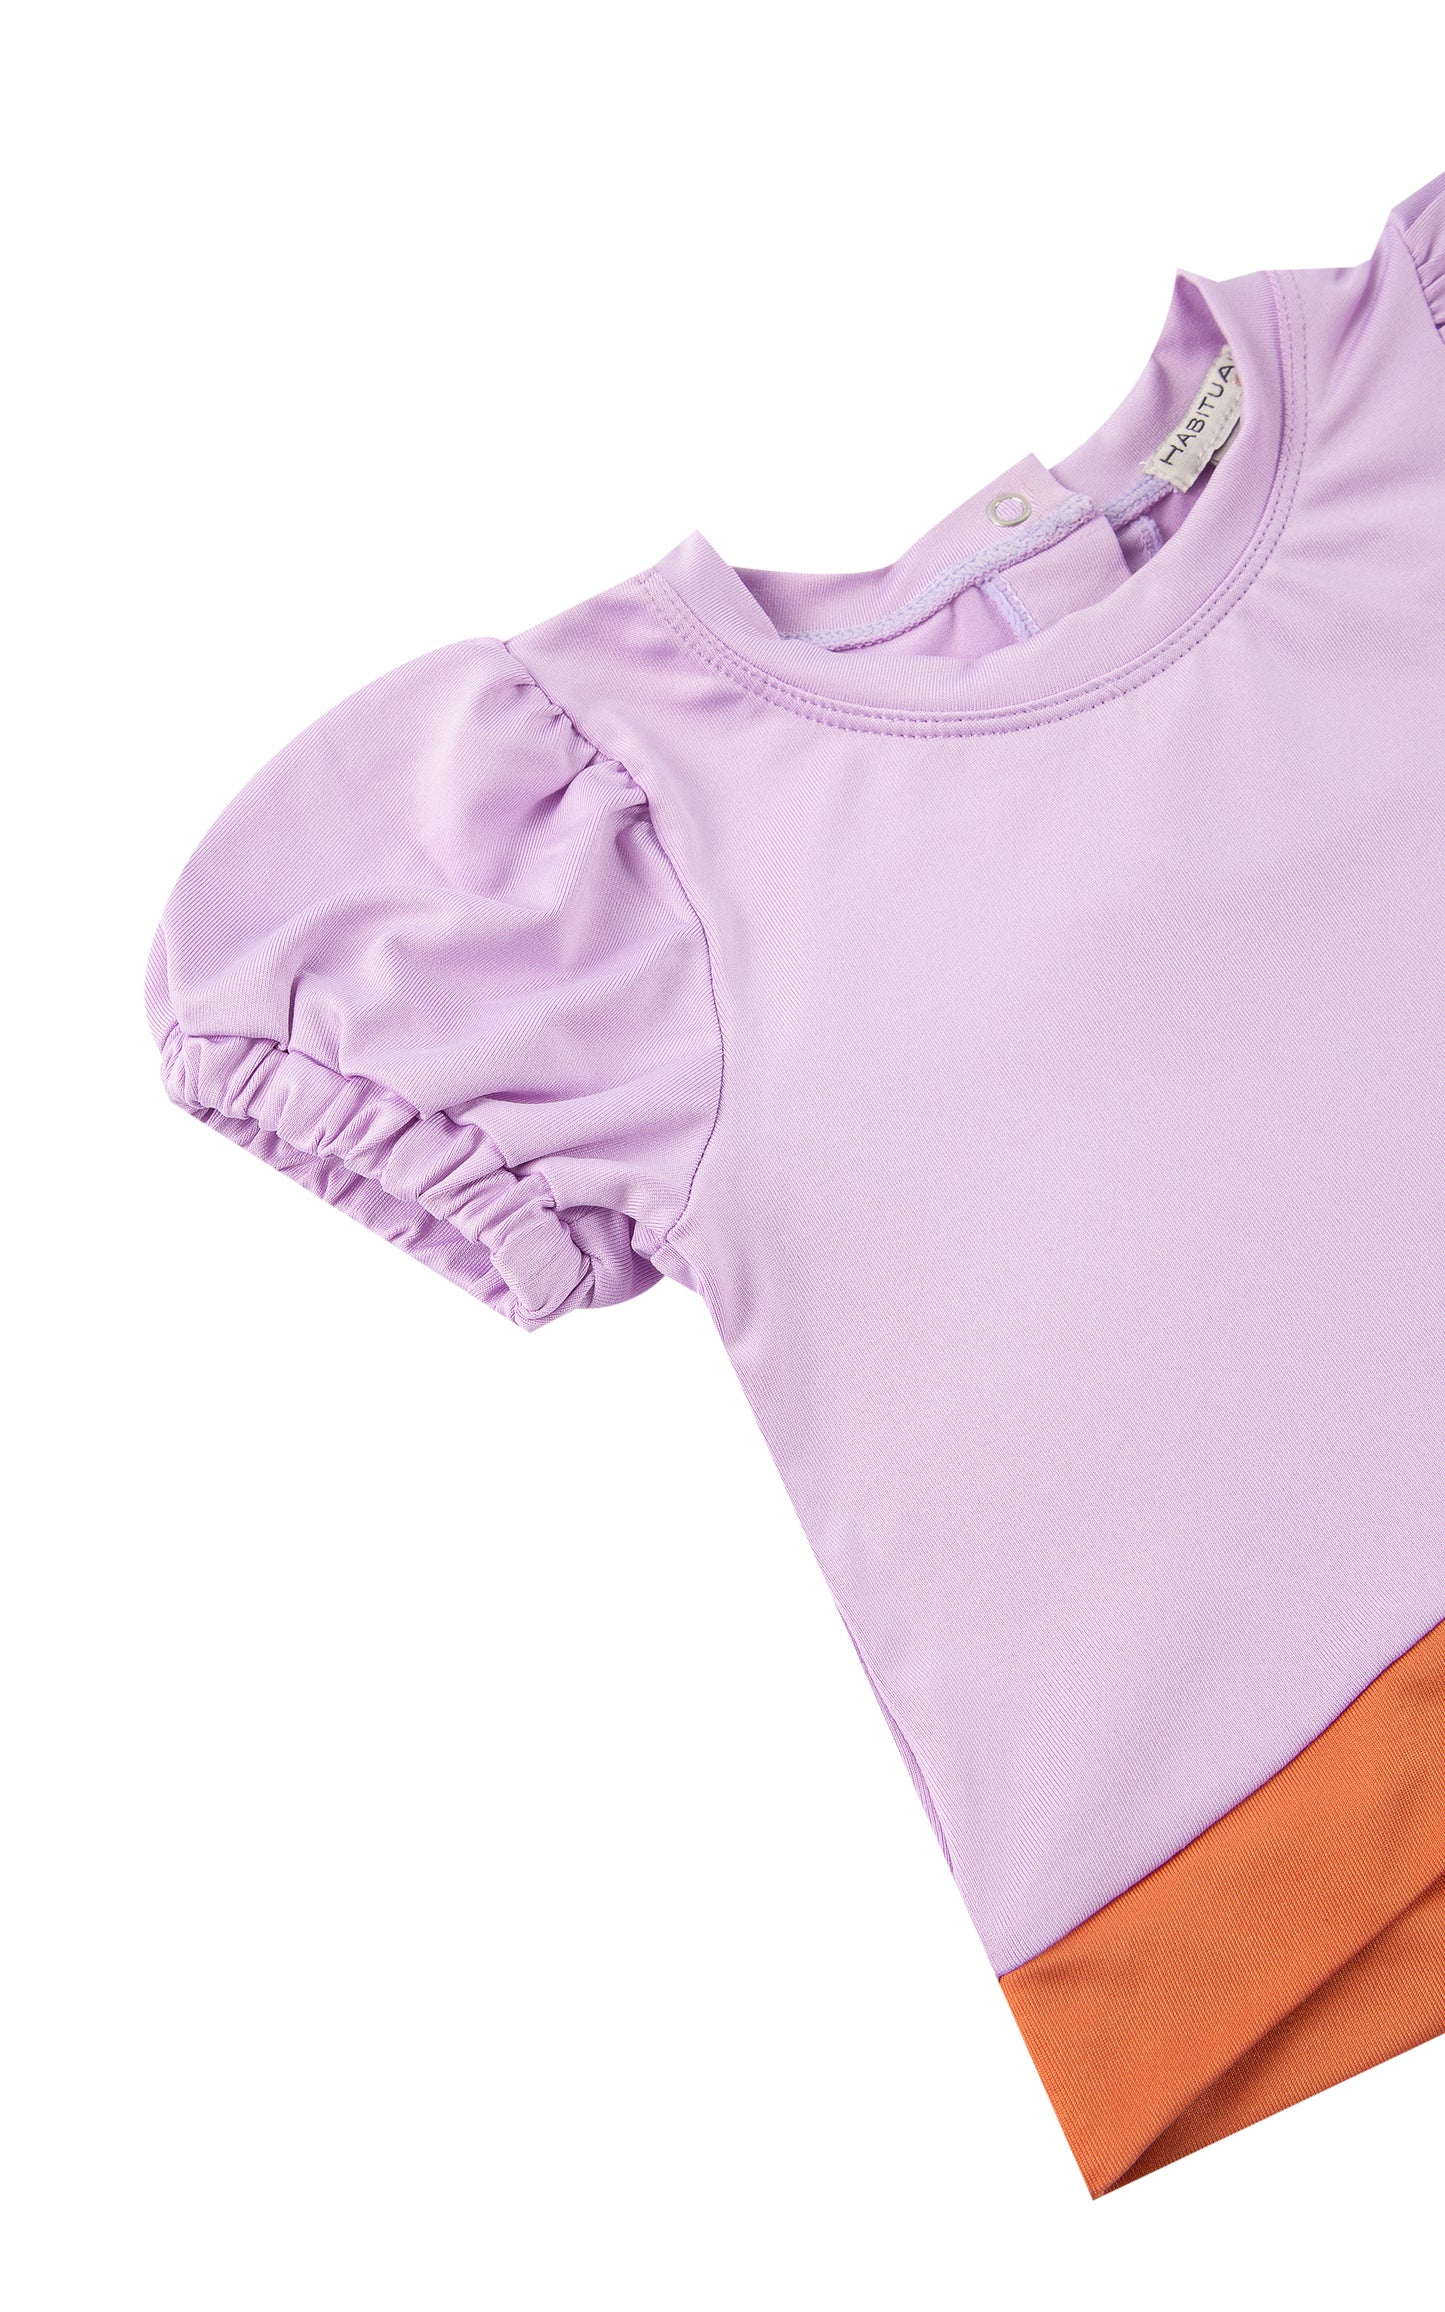 CLOSE UP LIGHT PURPLE  T-SHIRT WITH ORANGE AND WHITE STRIPES AND RUFFLE SLEEVES